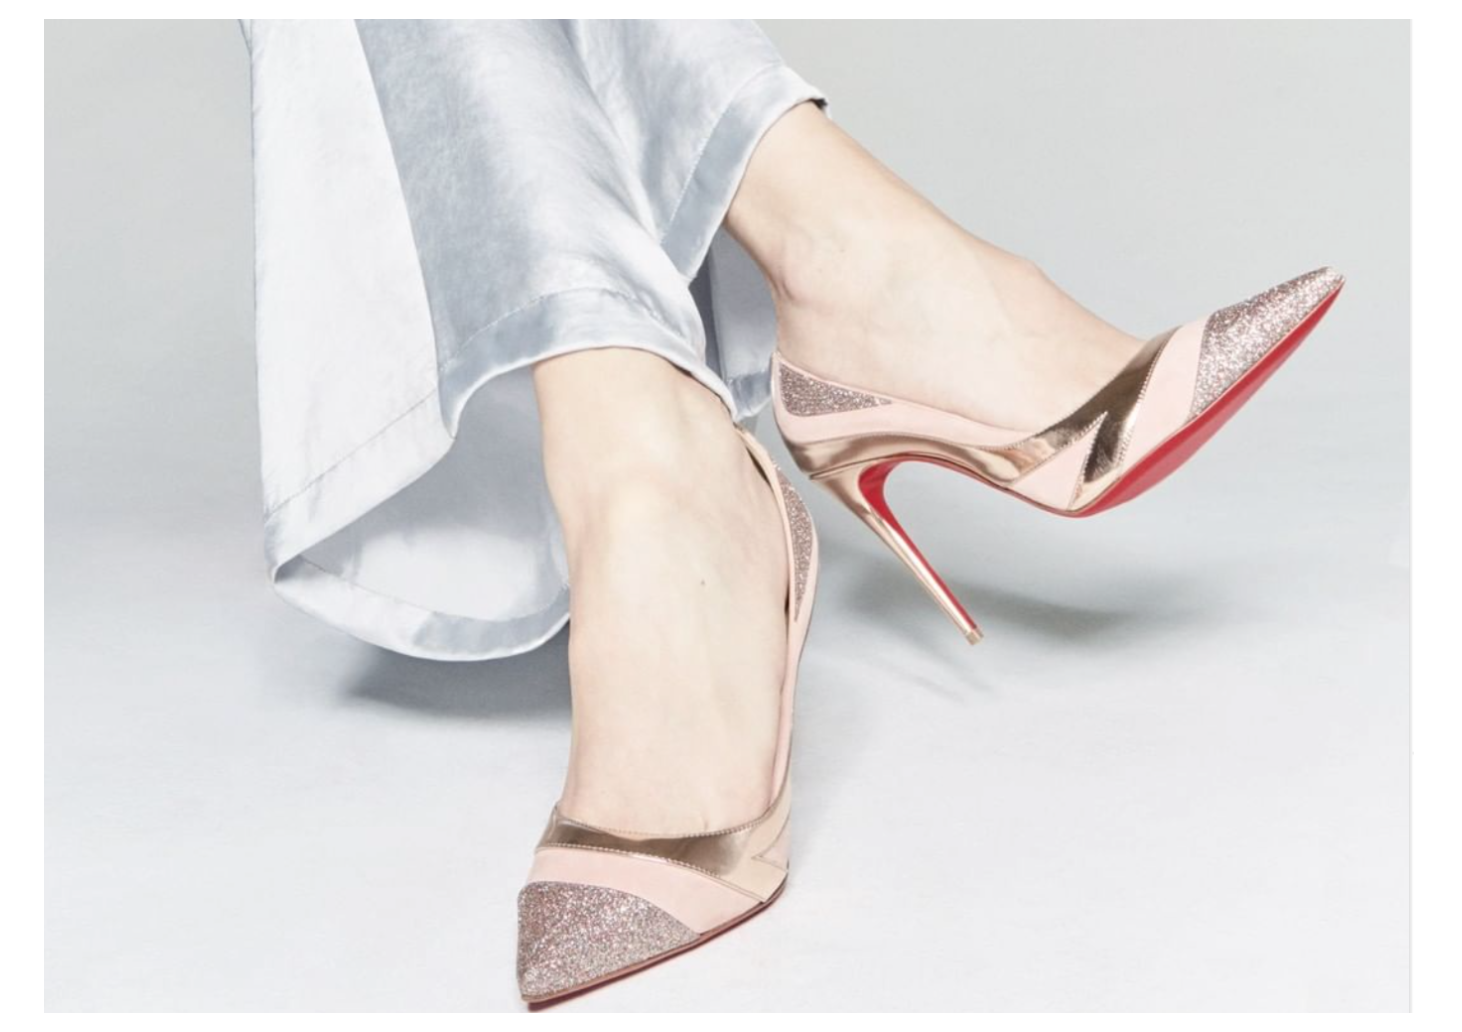 Tilsætningsstof Assimilate mål Christian Louboutin Prevails Against Amazon in European Union  Counterfeiting Case - The Fashion Law